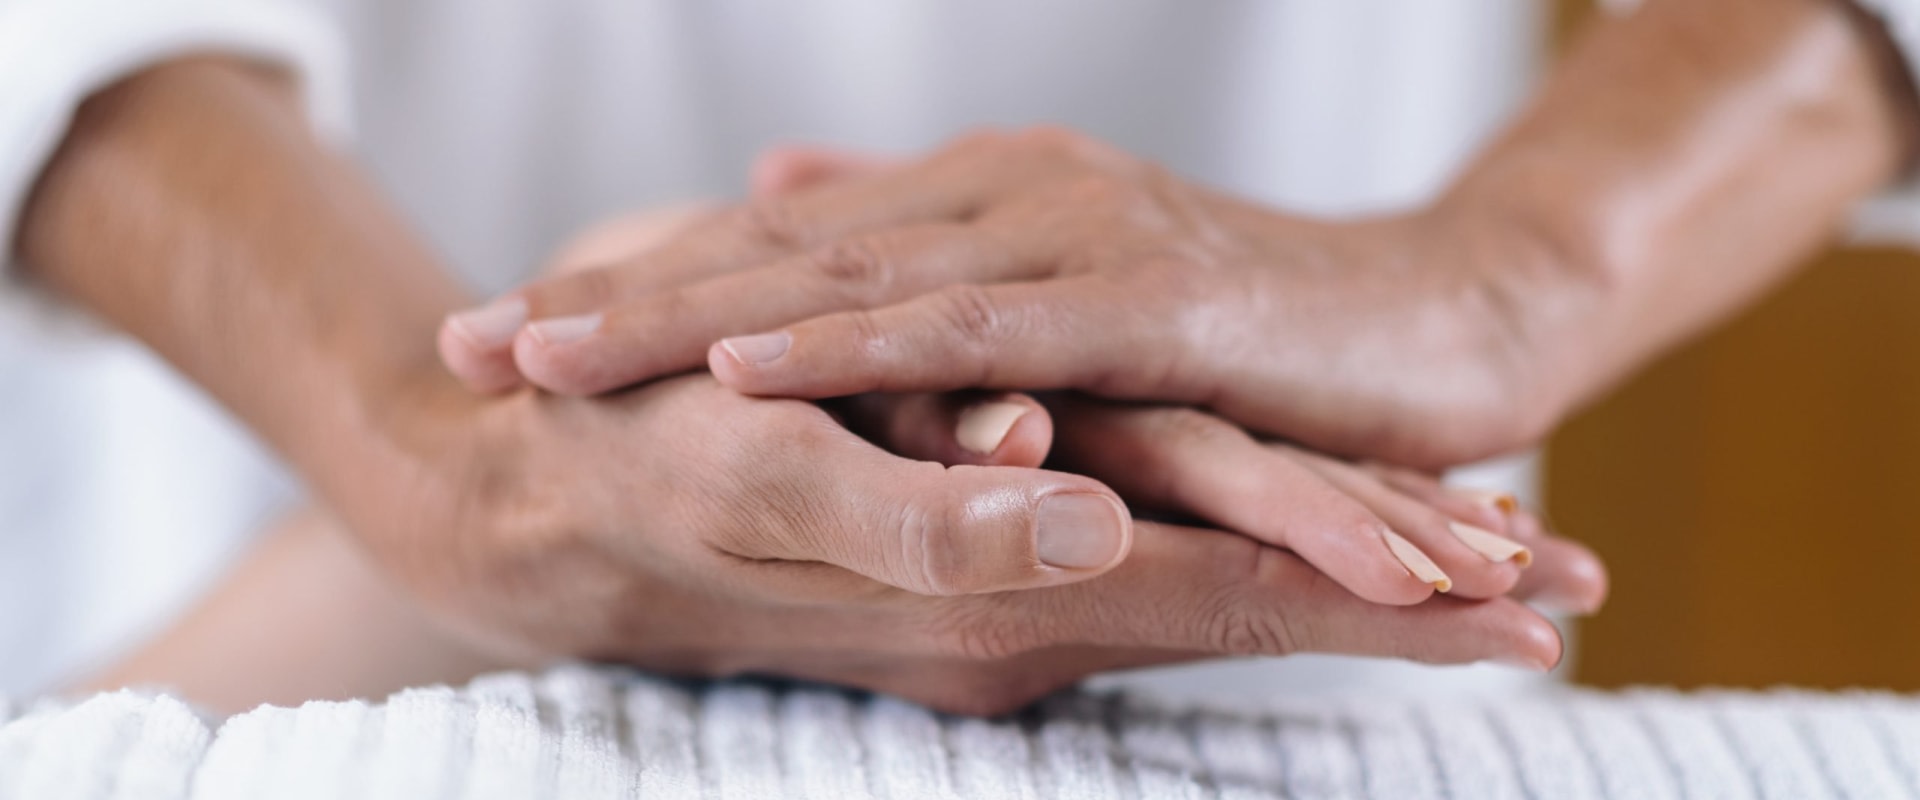 Find Relief From Hand Conditions With A Hand Specialist And Reiki Therapy In Atlanta